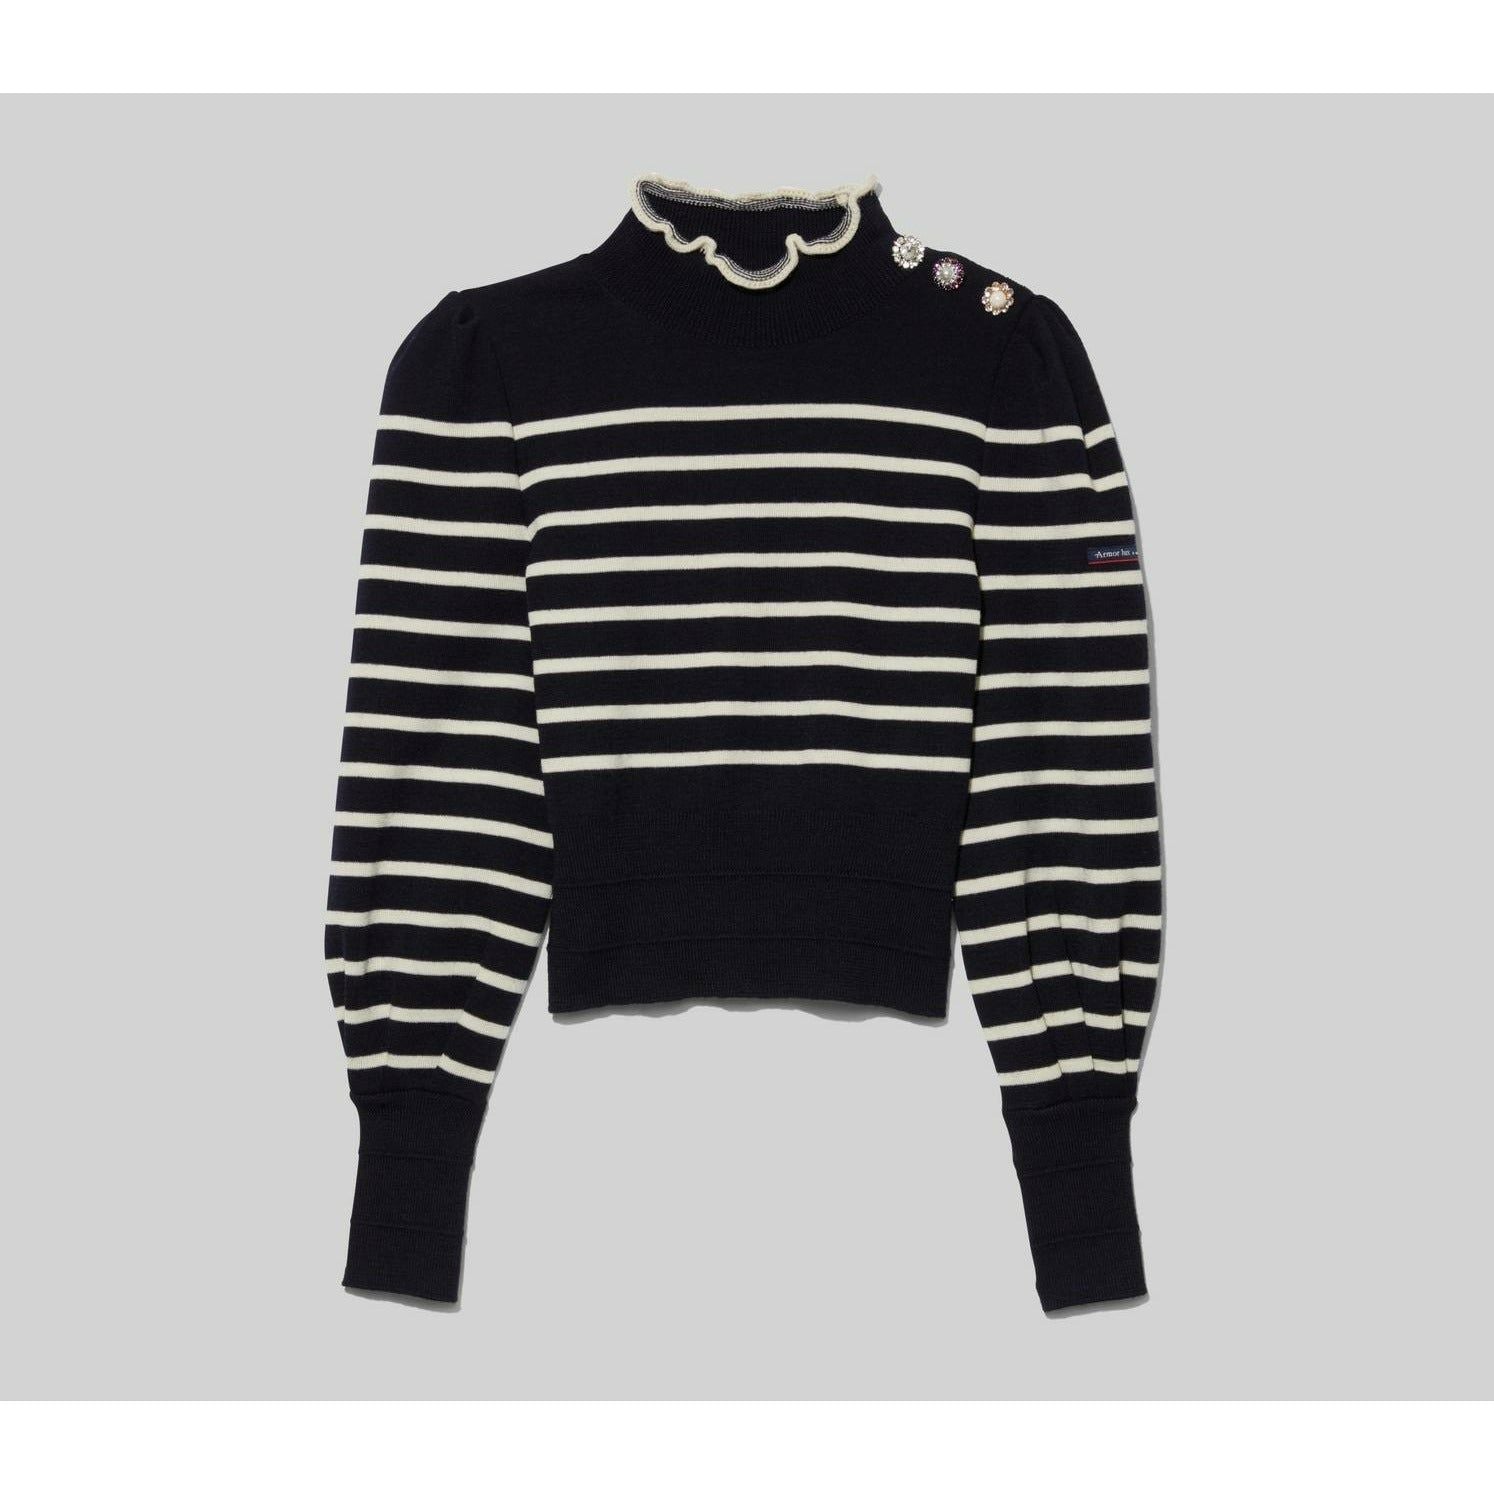 MARC JACOBS SWEATER - Yooto